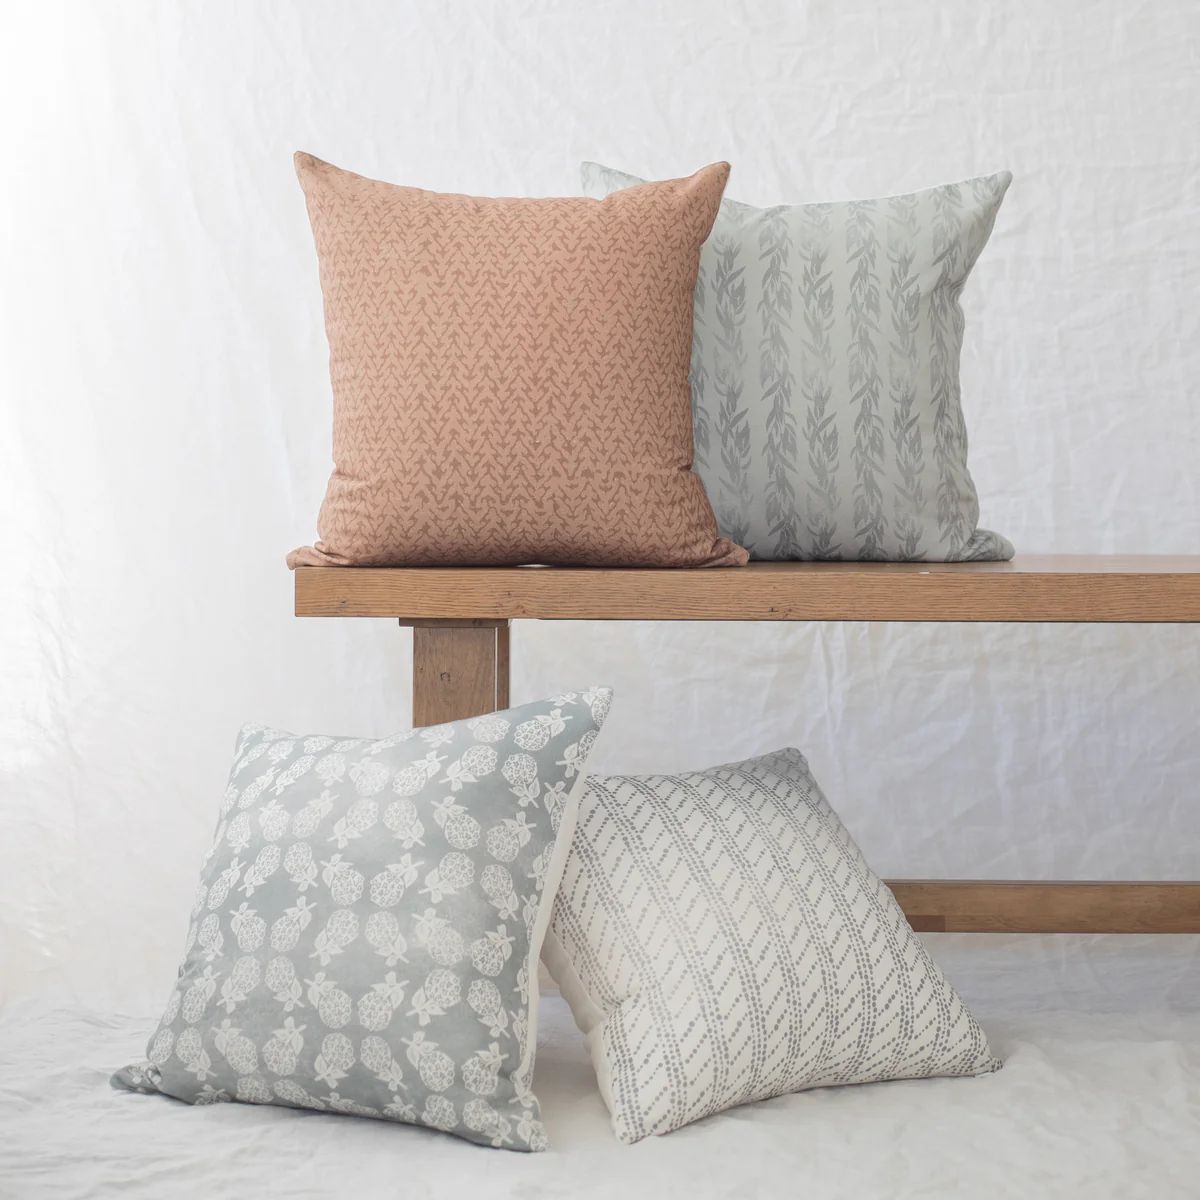 Amaro - 4 Pack Pillow Covers | Woven Nook